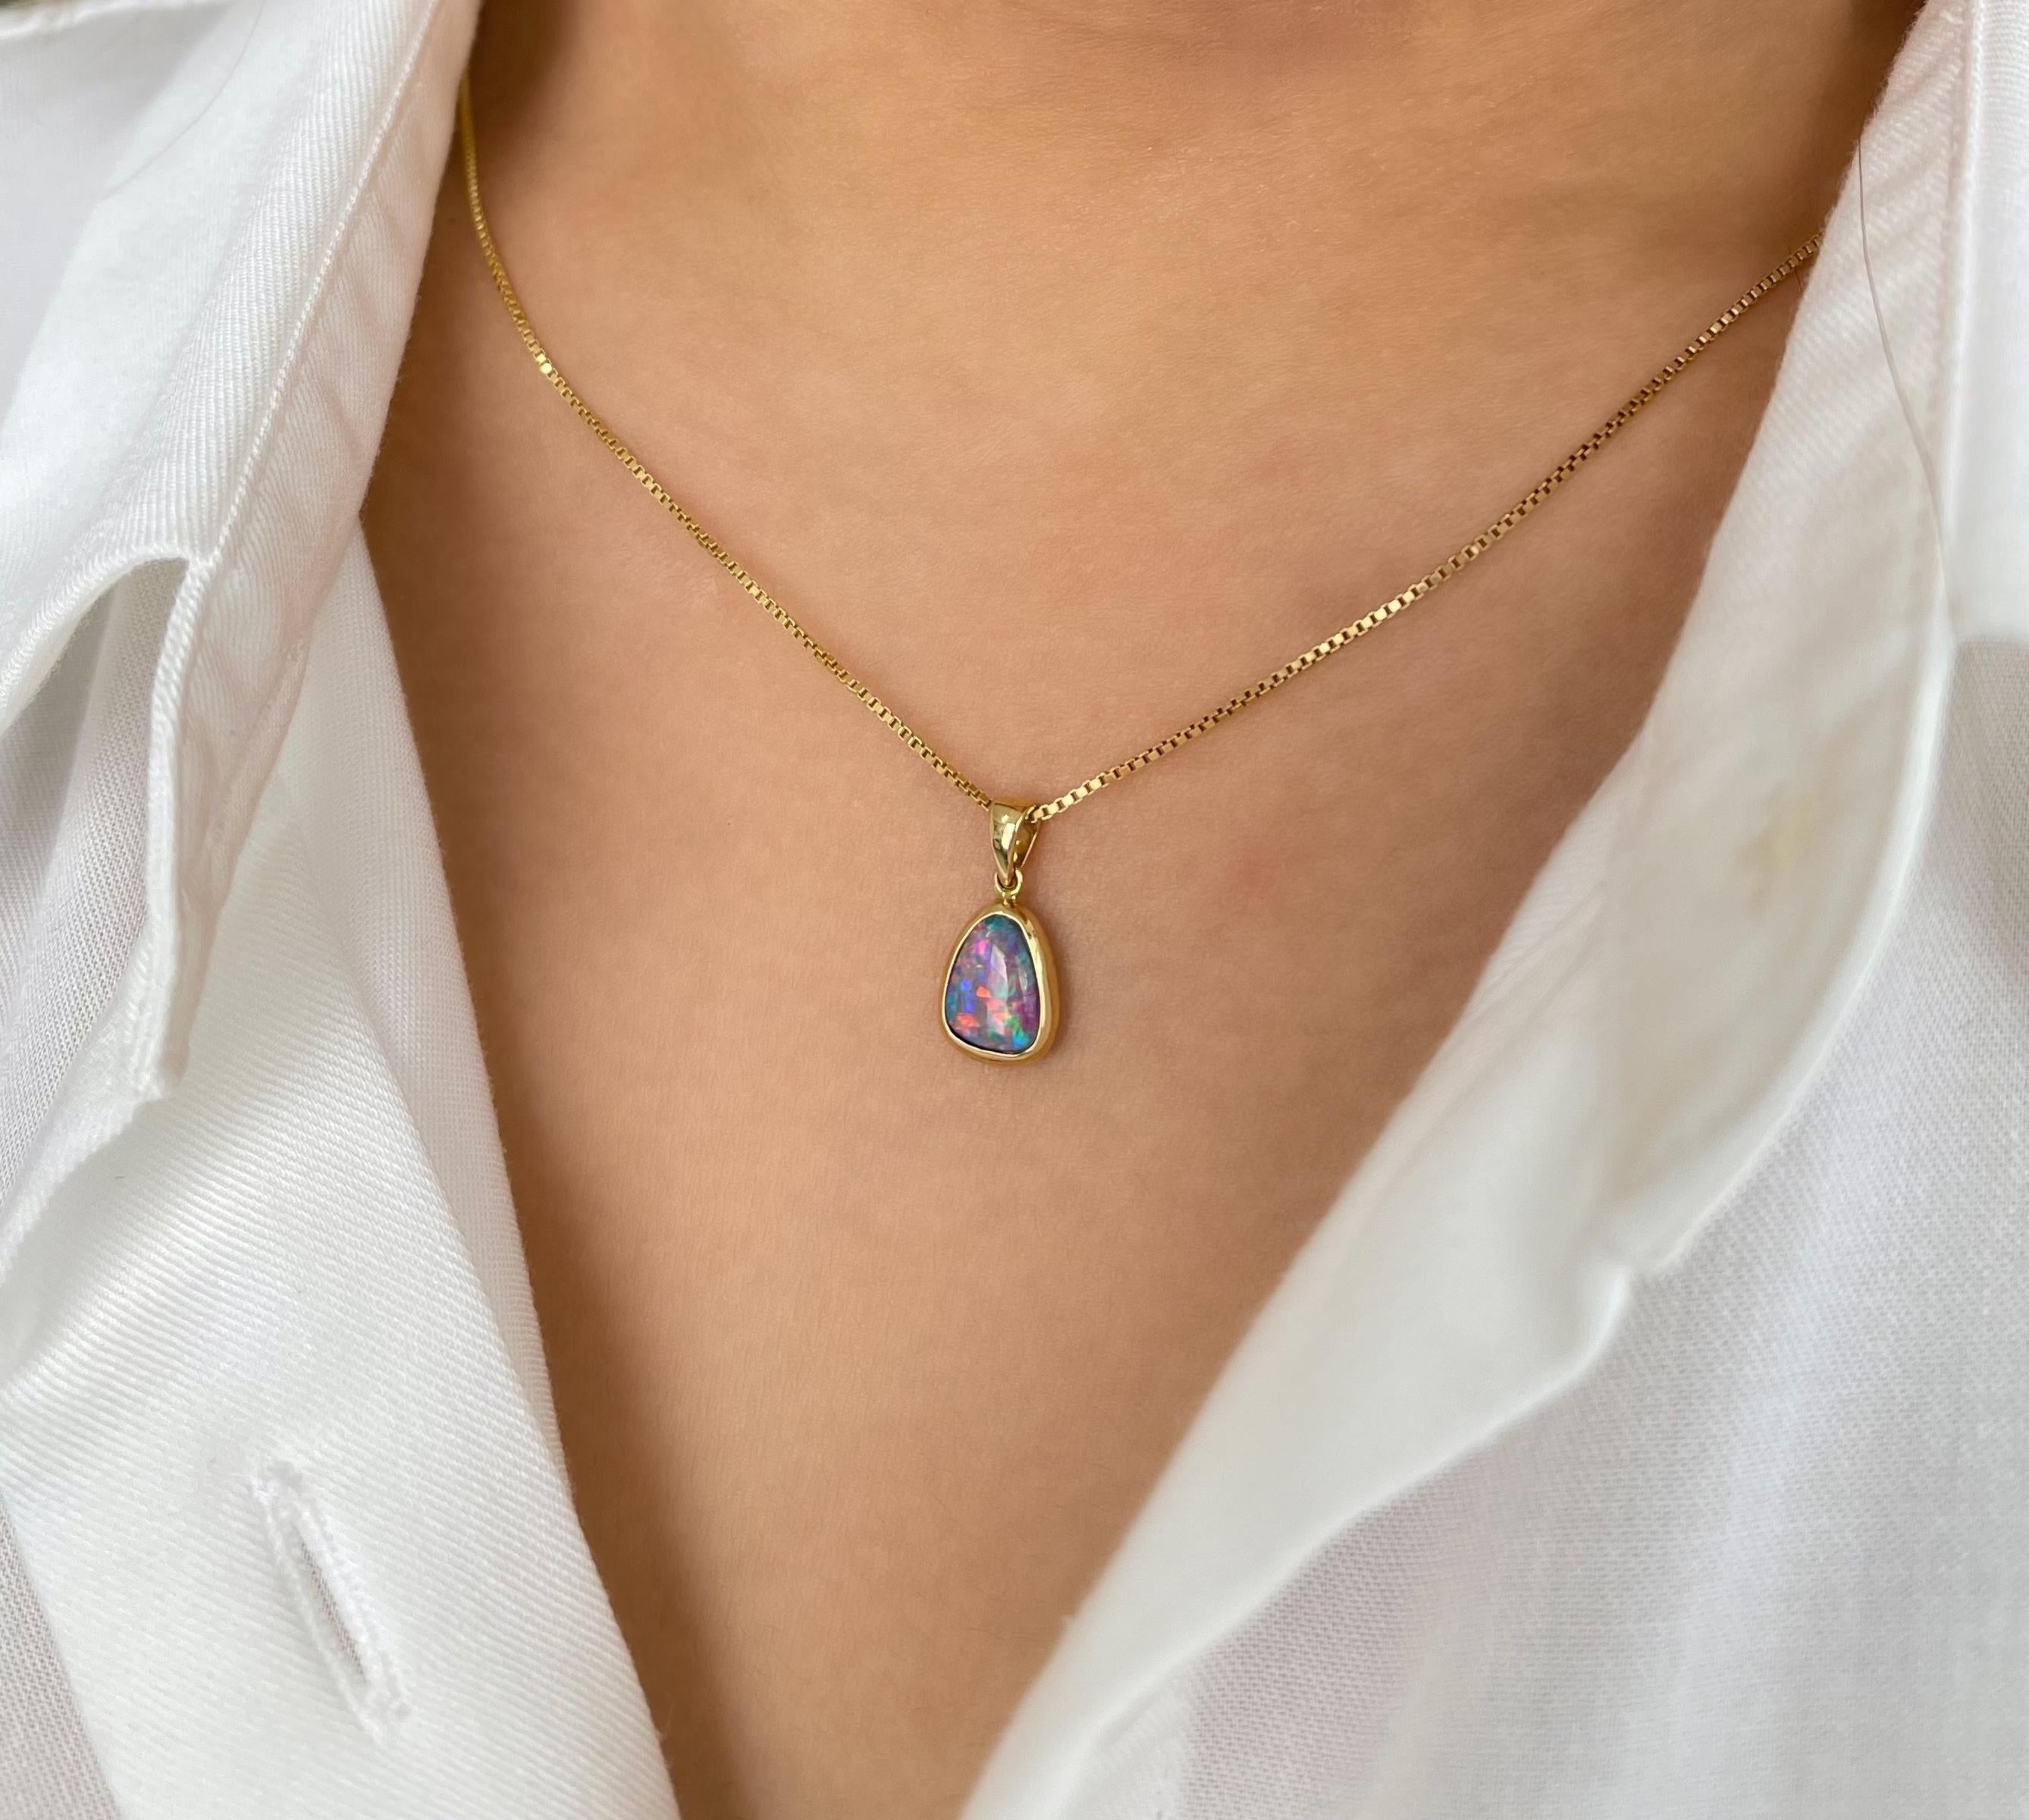 Breathtaking and radiant is the “Stacy” opal pendant featuring a wonderful and unique Australian opal doublet. Set in a graceful 18K yellow gold, the opal gemstone possesses a rare and fascinating play of colour that is absolutely captivating to the